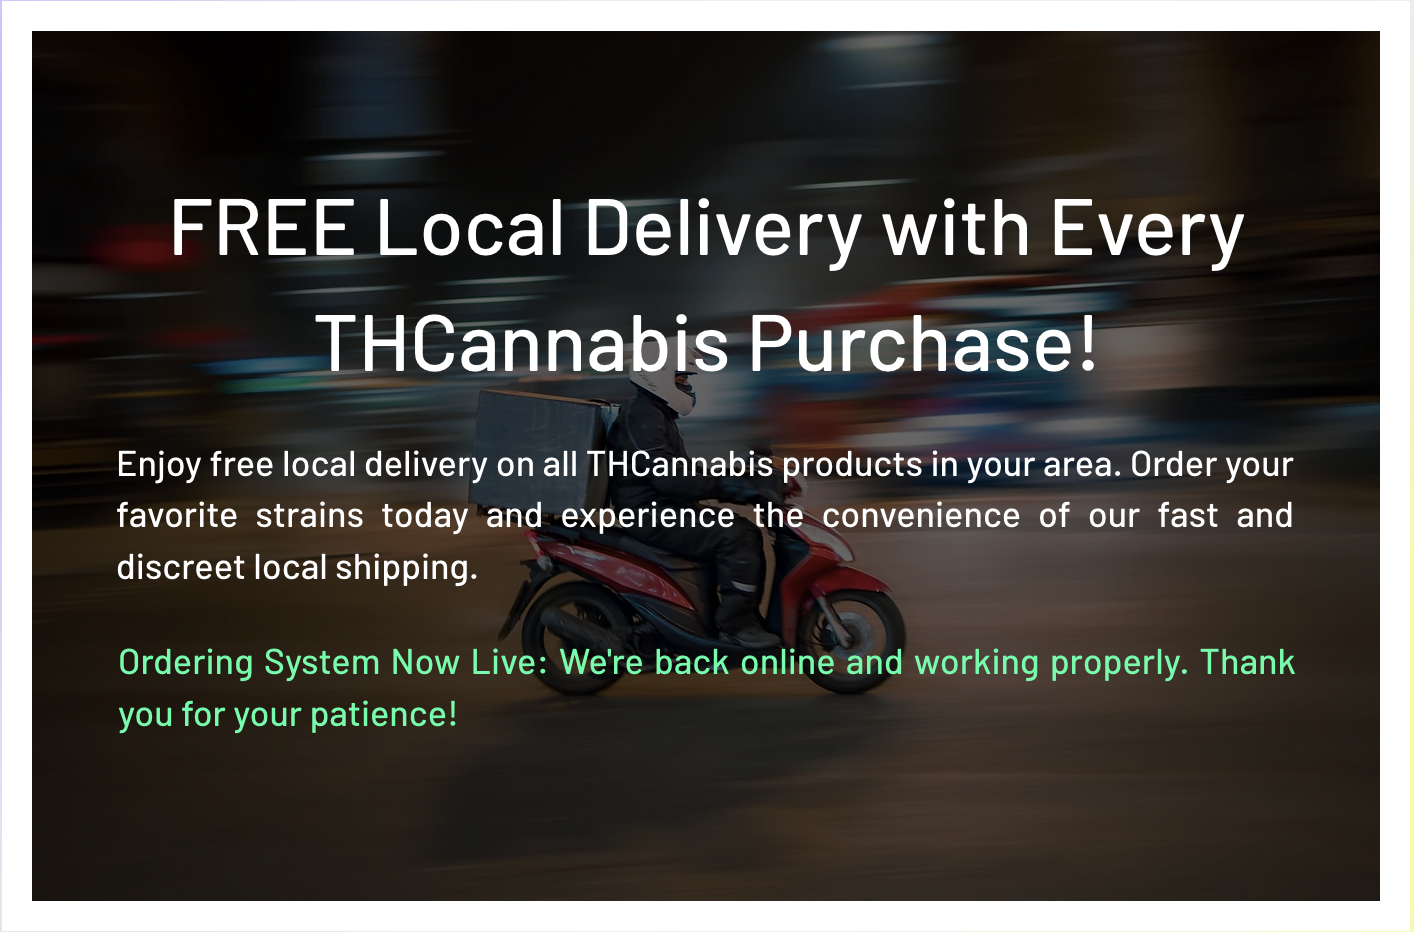 FREE Local Delivery with Every THCannabis Purchase!